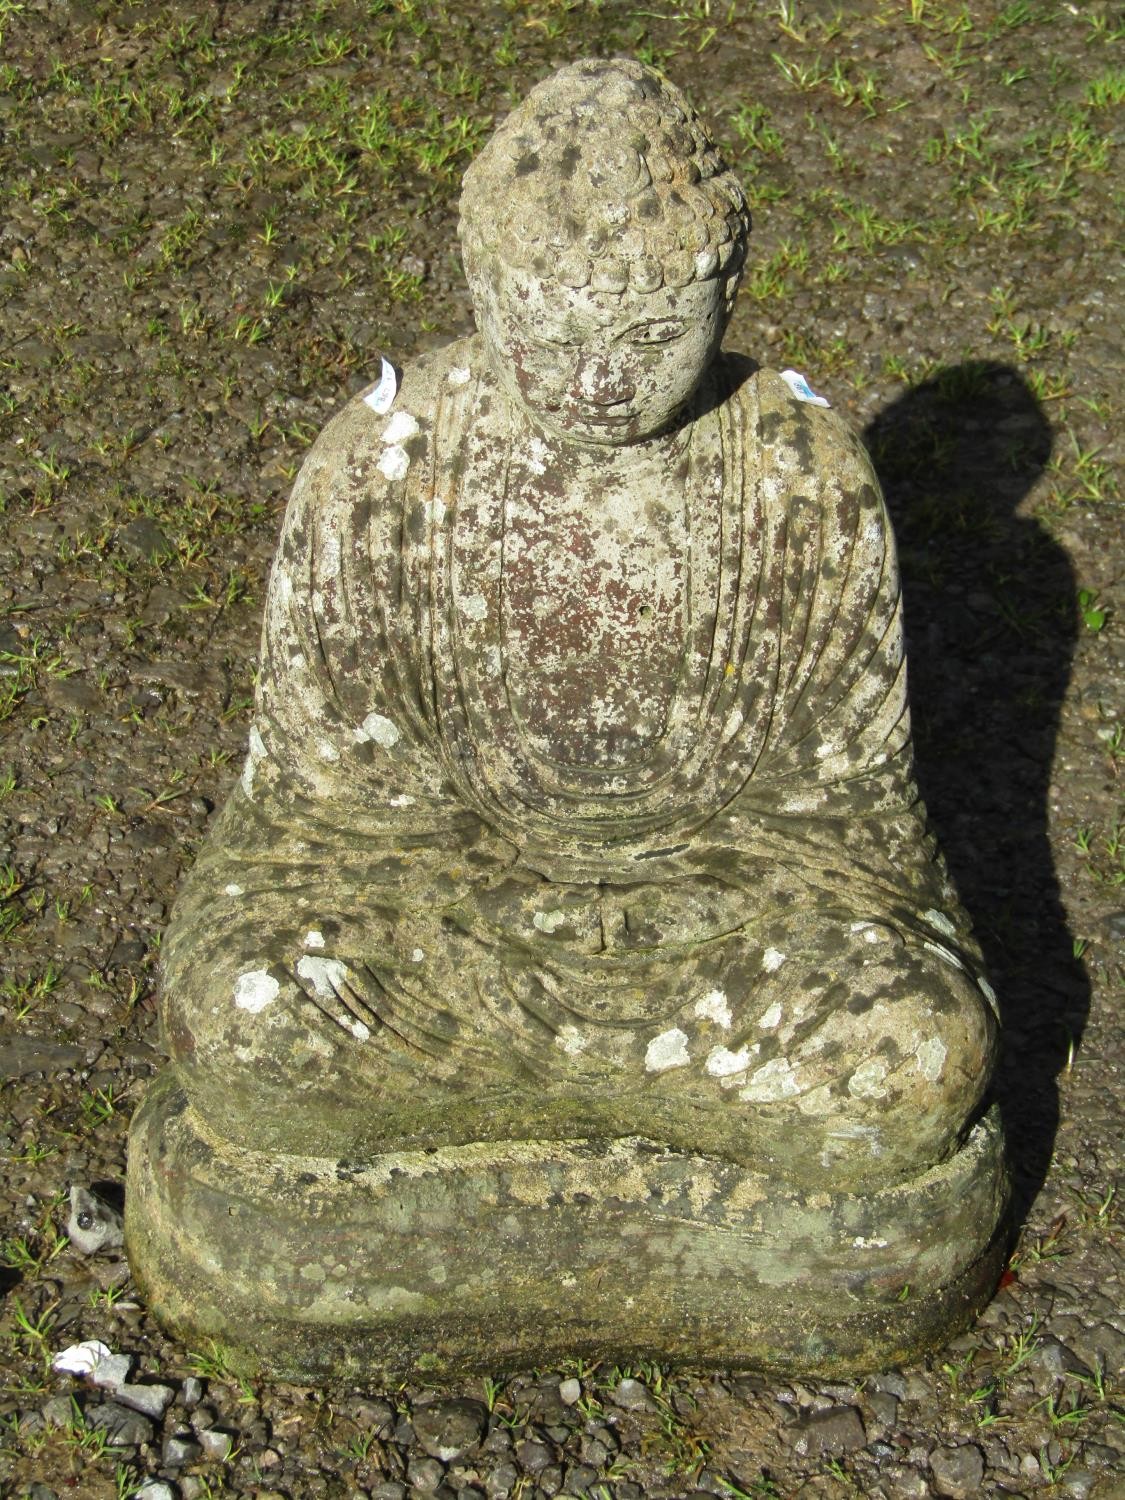 A cast composition stone garden ornament in the form of a seated Buddha in lotus position, raised on